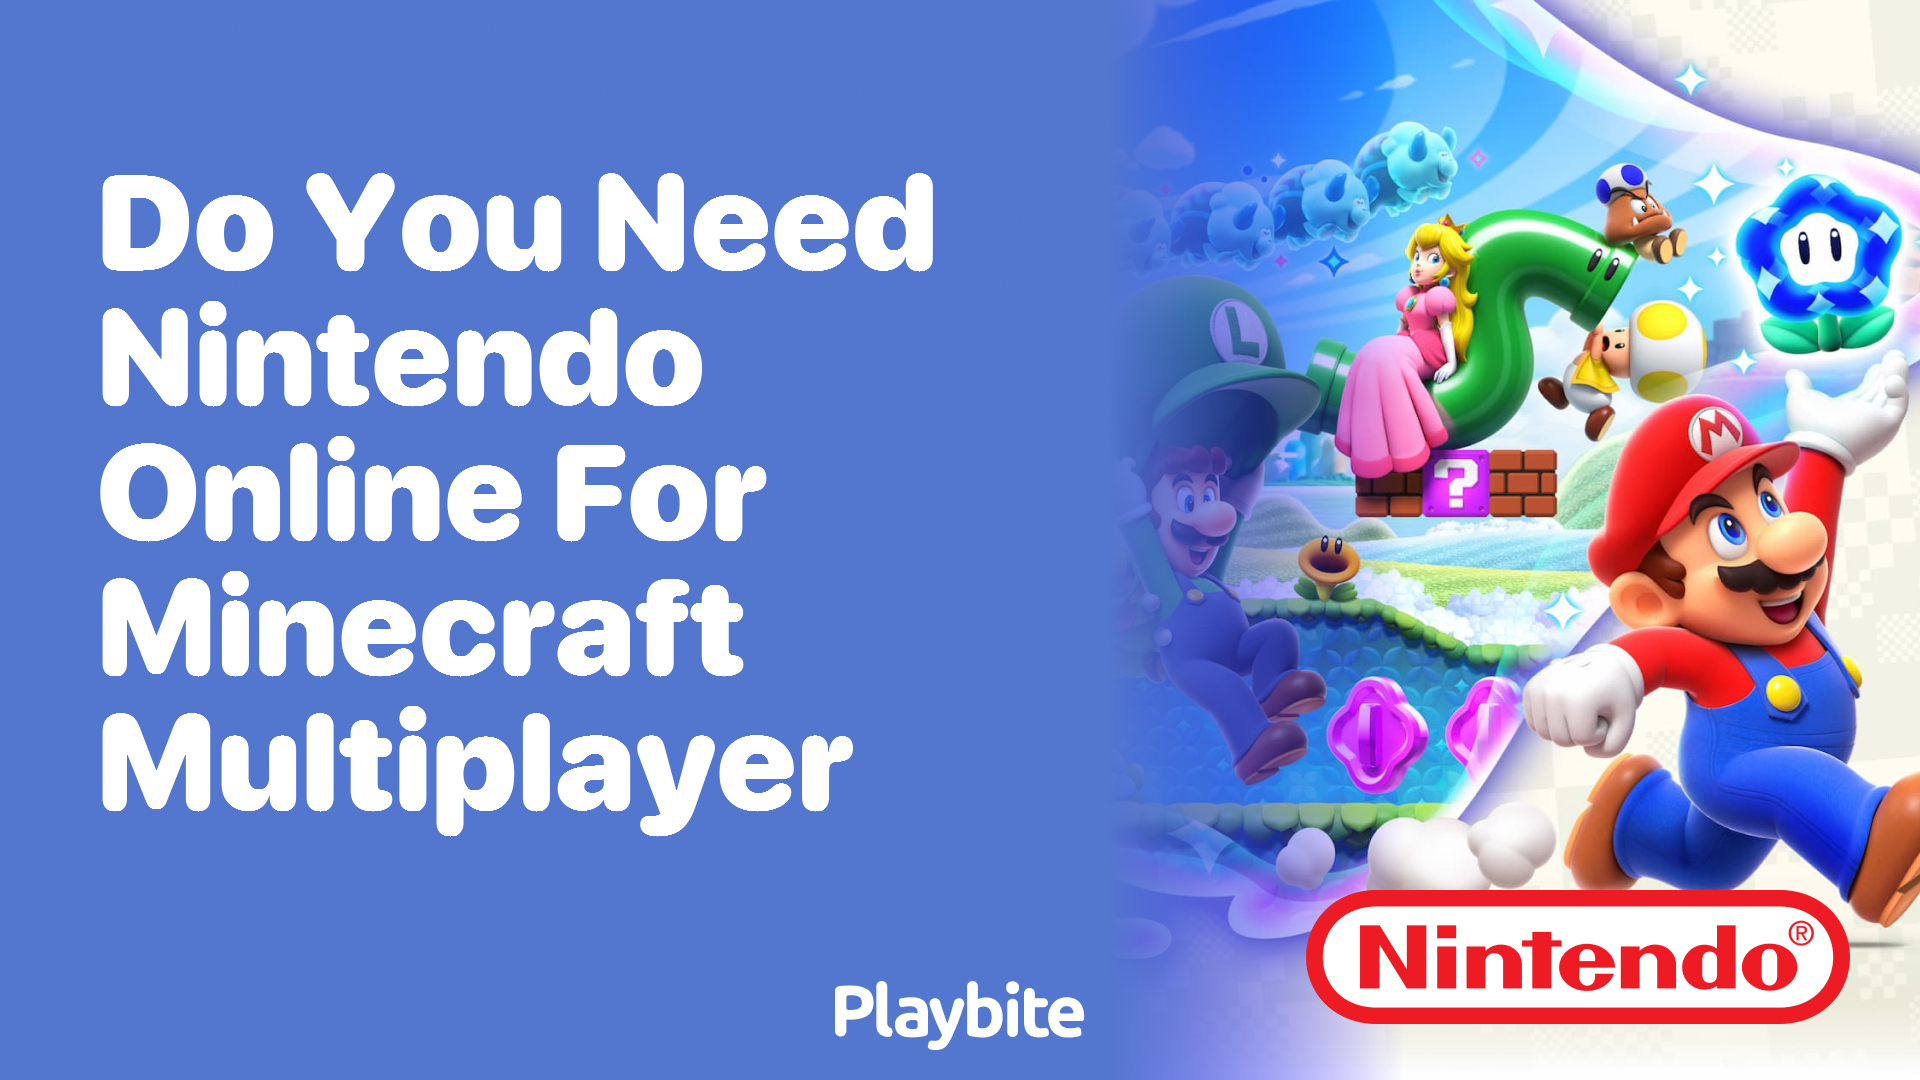 Do You Need Nintendo Online for Minecraft Multiplayer?